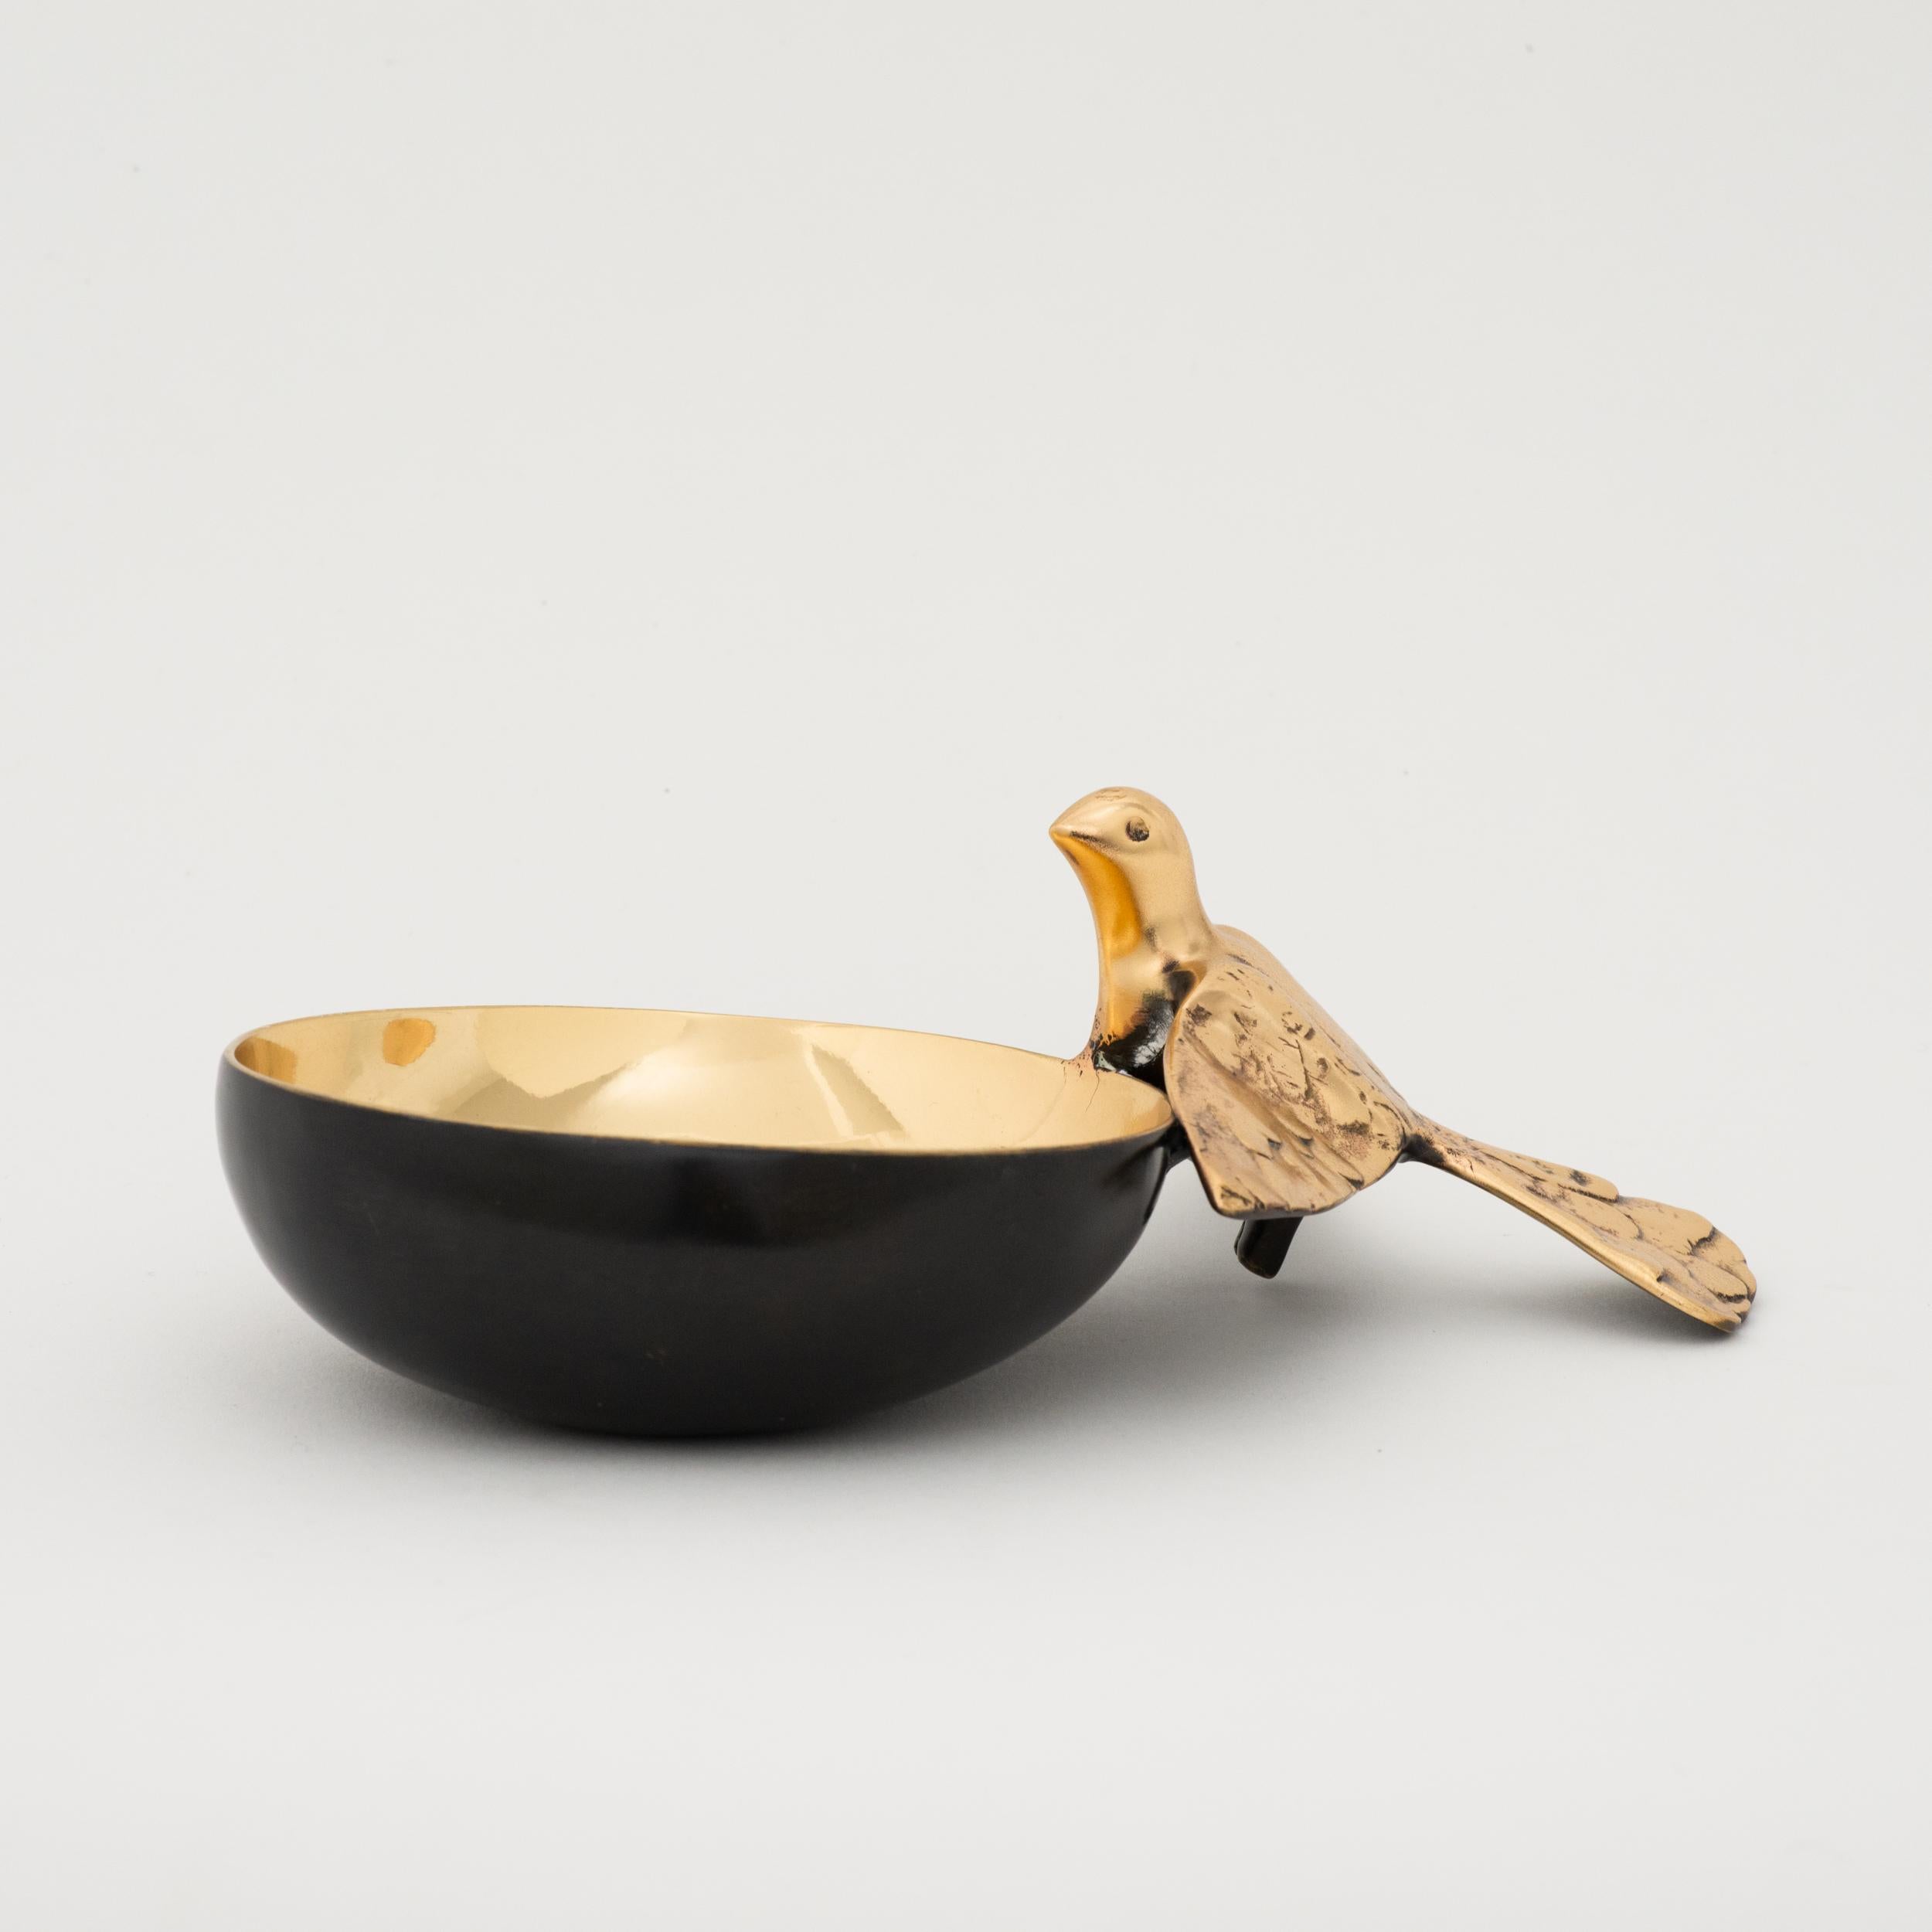 Sumptuous decorative bowl with bird.

Unique design and beautiful finish. The piece is entirely handcrafted with great skills and talent. Cast using very traditional techniques, the bird and inside of the bowls are polished revealing the lustrous